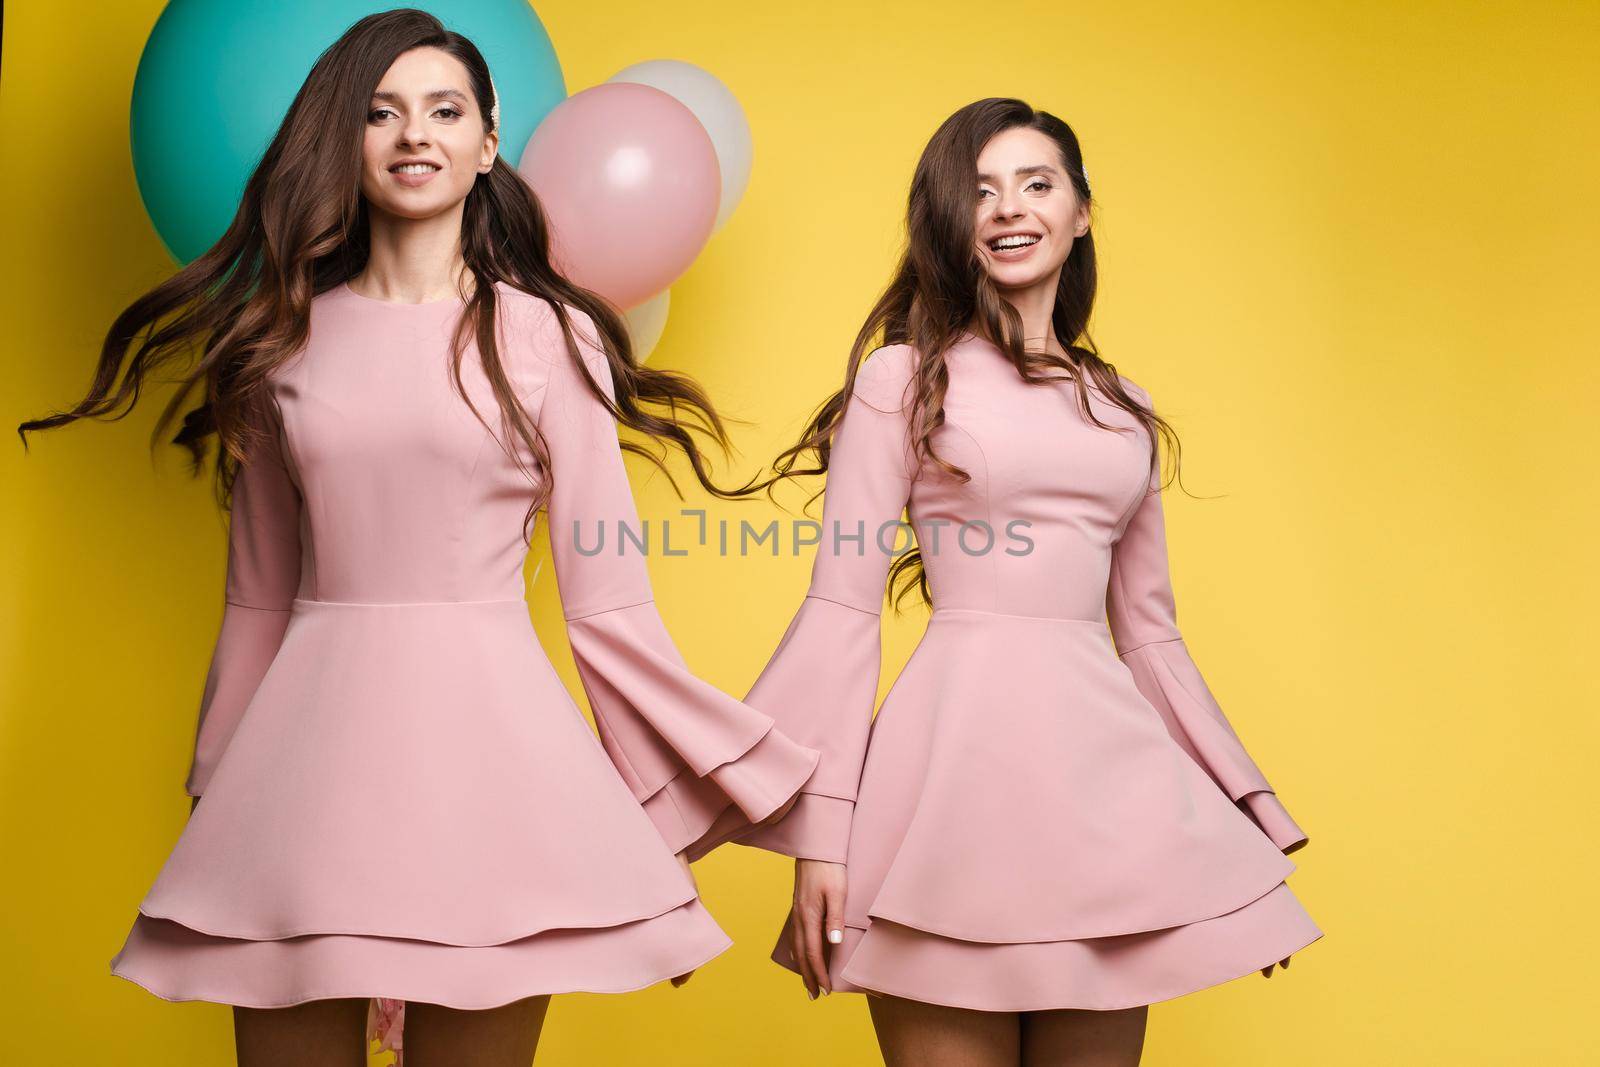 Studio portrait of gorgeous brunette twins posing in trendy elegant pink dresses. Stylish outlooks. Smiling at camera. Yellow background with mint and pink air balloons.